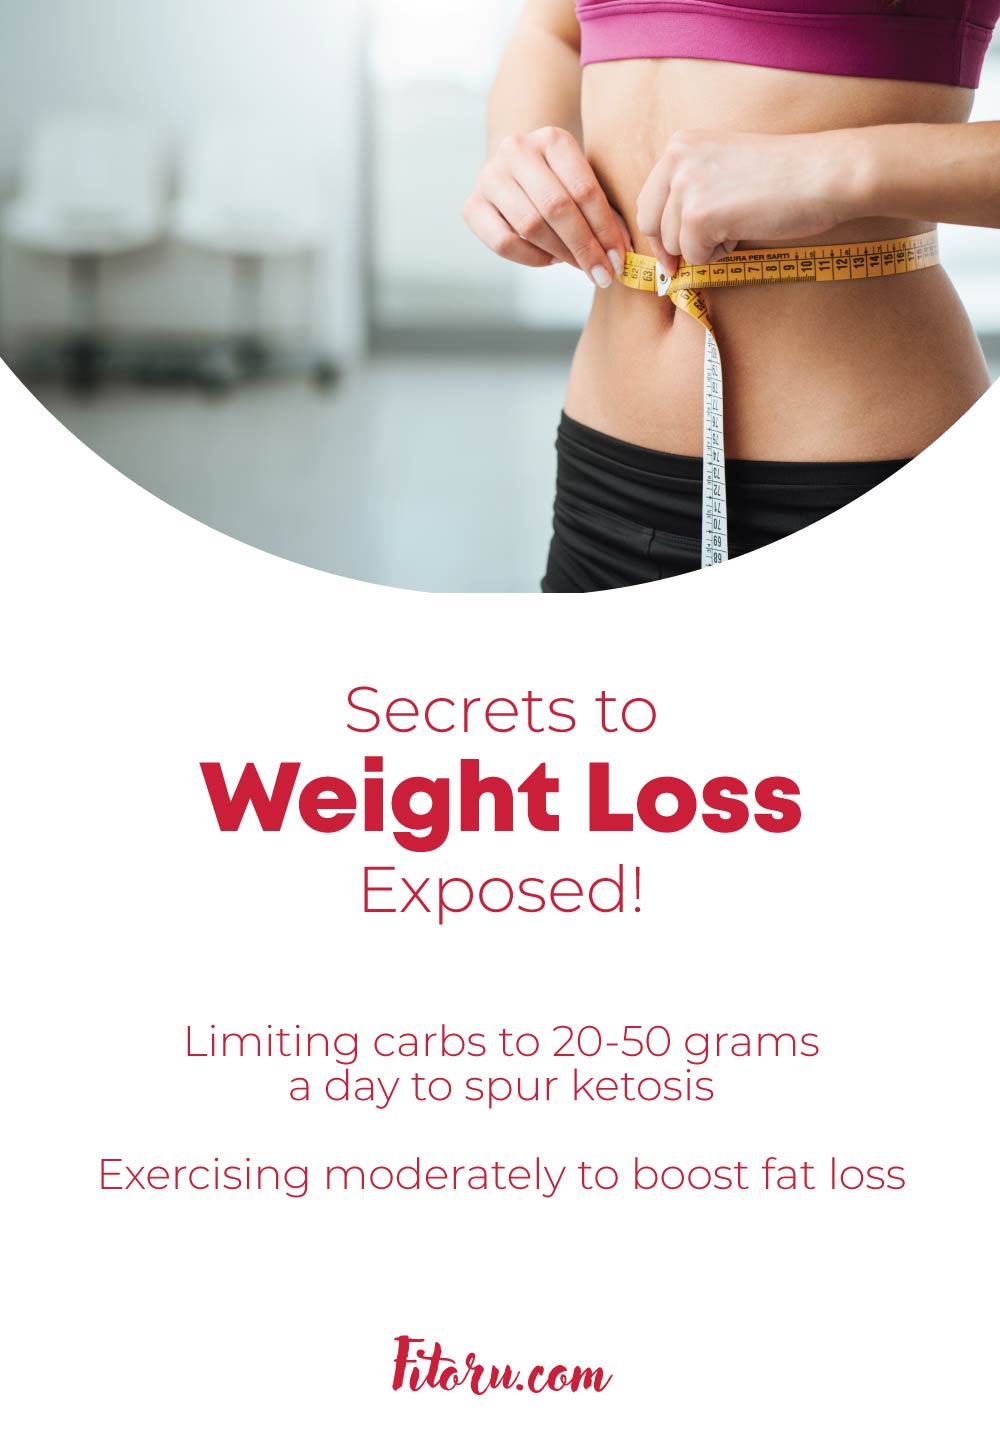 Secrets to Weight Loss Exposed!